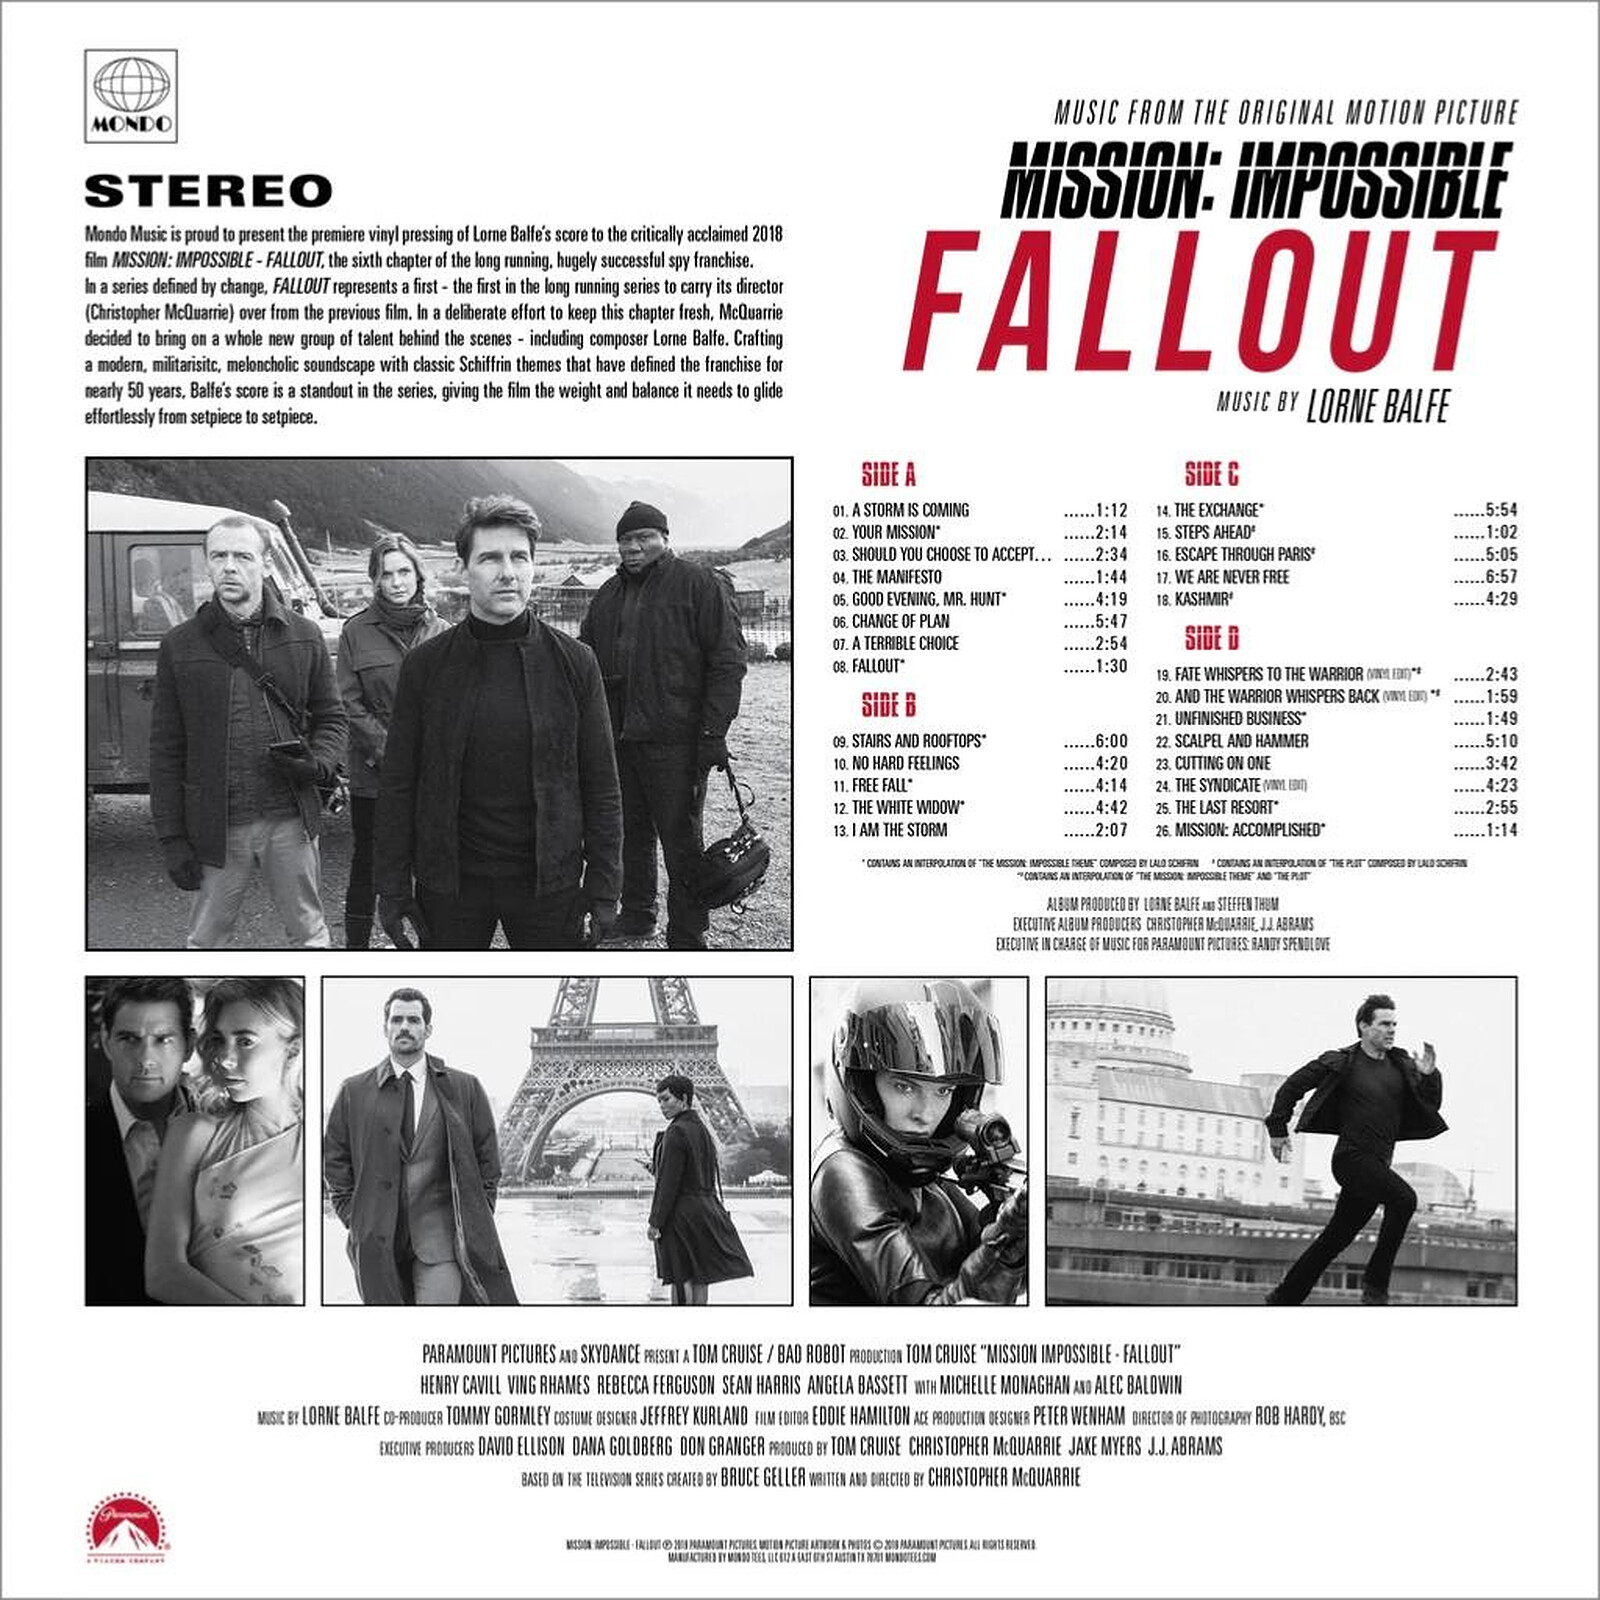 Mission: Impossible – Fallout – Music From The Original Motion